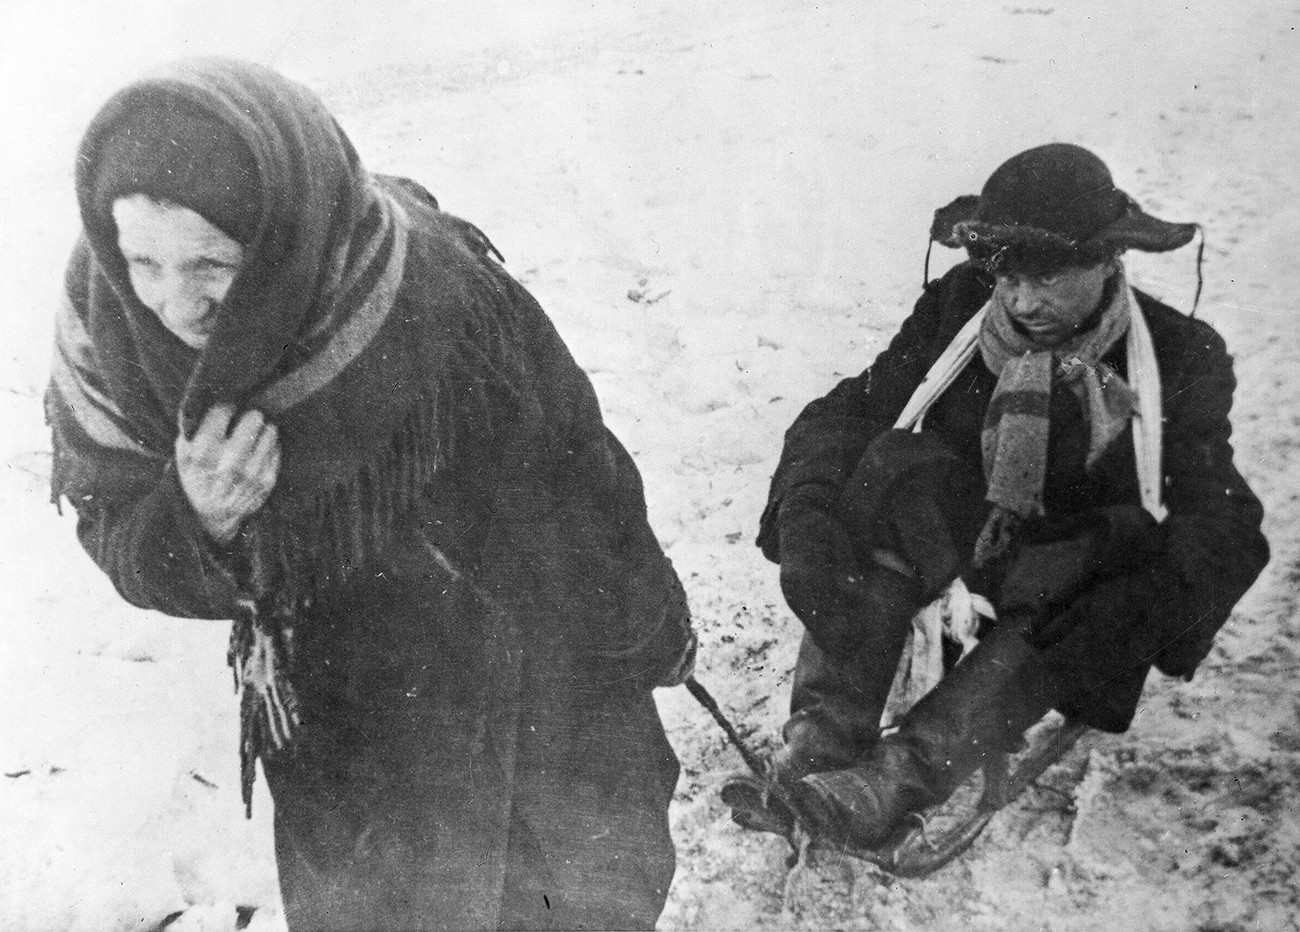 A woman dragging a sled with her malnourished husband, Leningrad, during the Siege